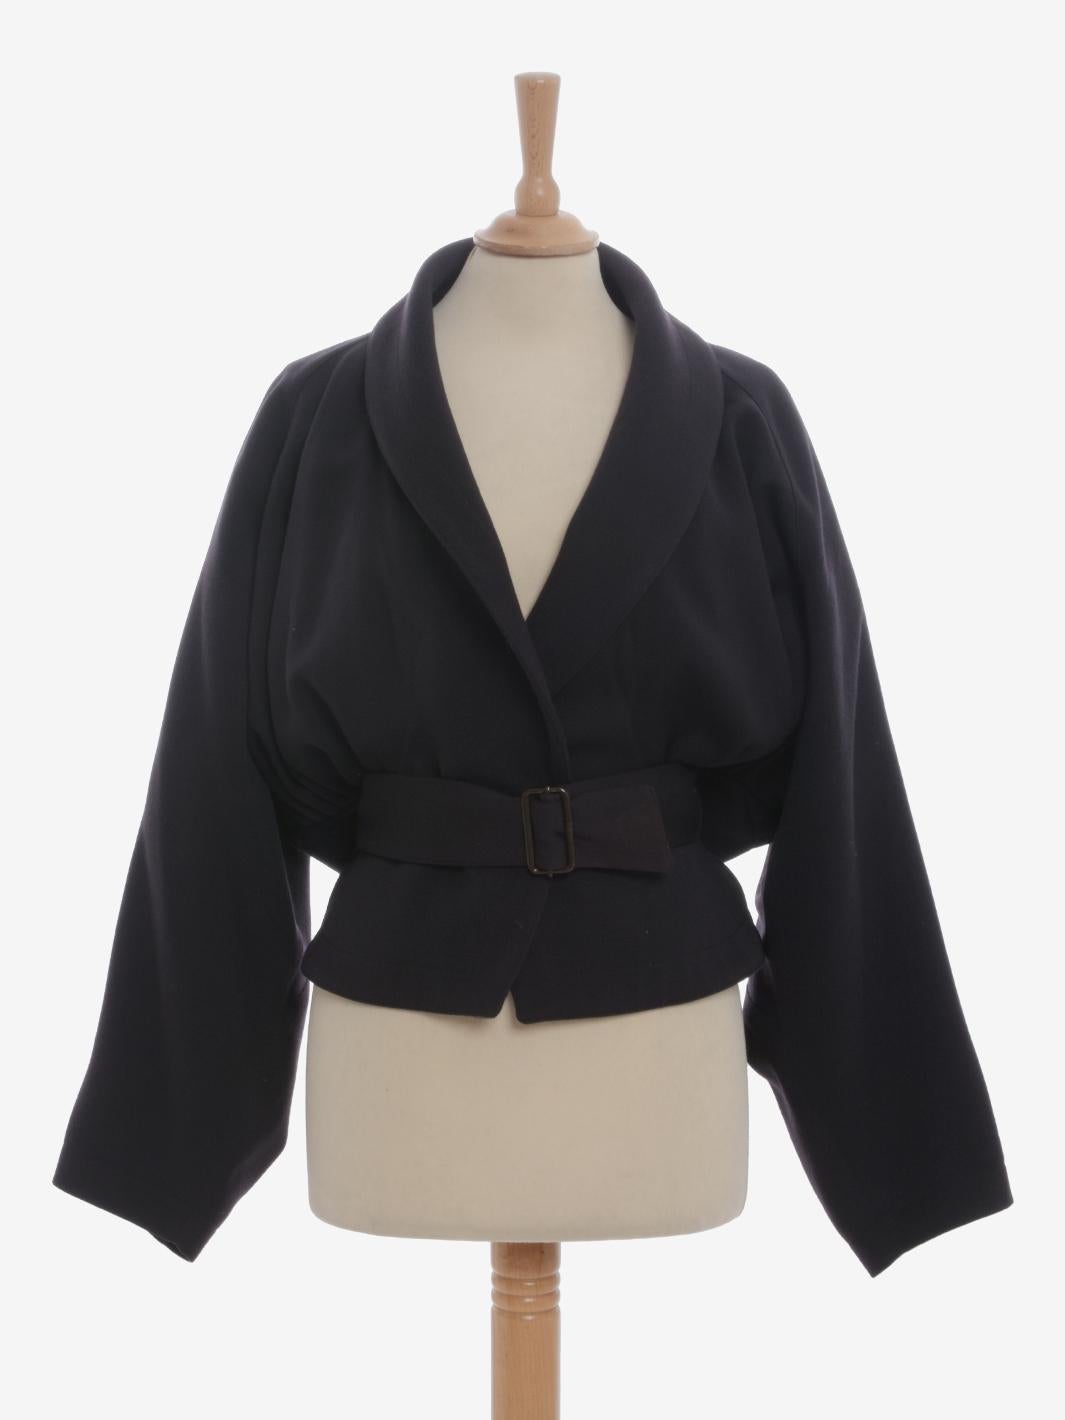 Alaïa Wool Belted Jacket is a rare blazer made by Azzedine Alaïa in the second half of 1980s with a shawl collar and slightly batwing sleeves. The crossover waistband is adjustable, and the sides are decorated with multi pence that create a balloon